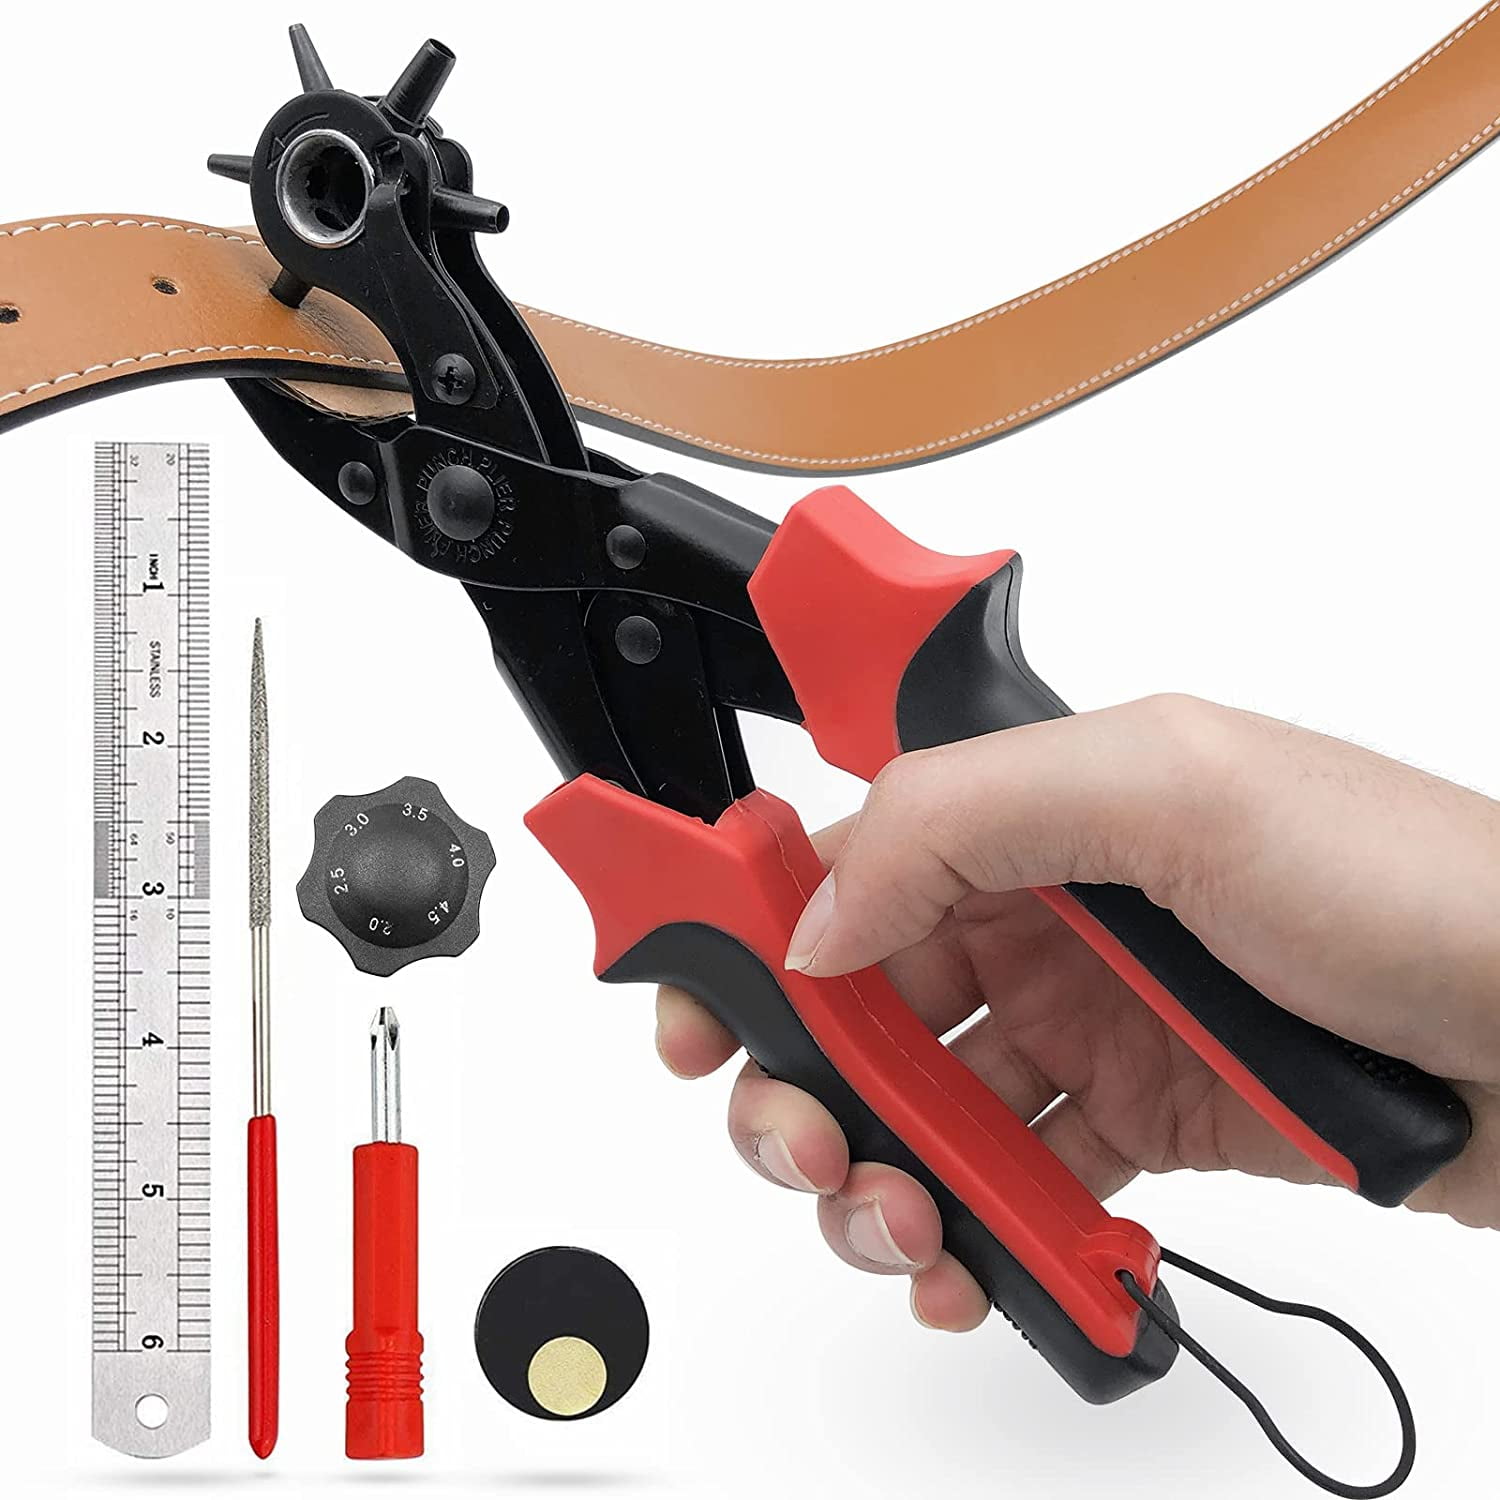 Heavy Duty Leather Hole Puncher Tool For Belts